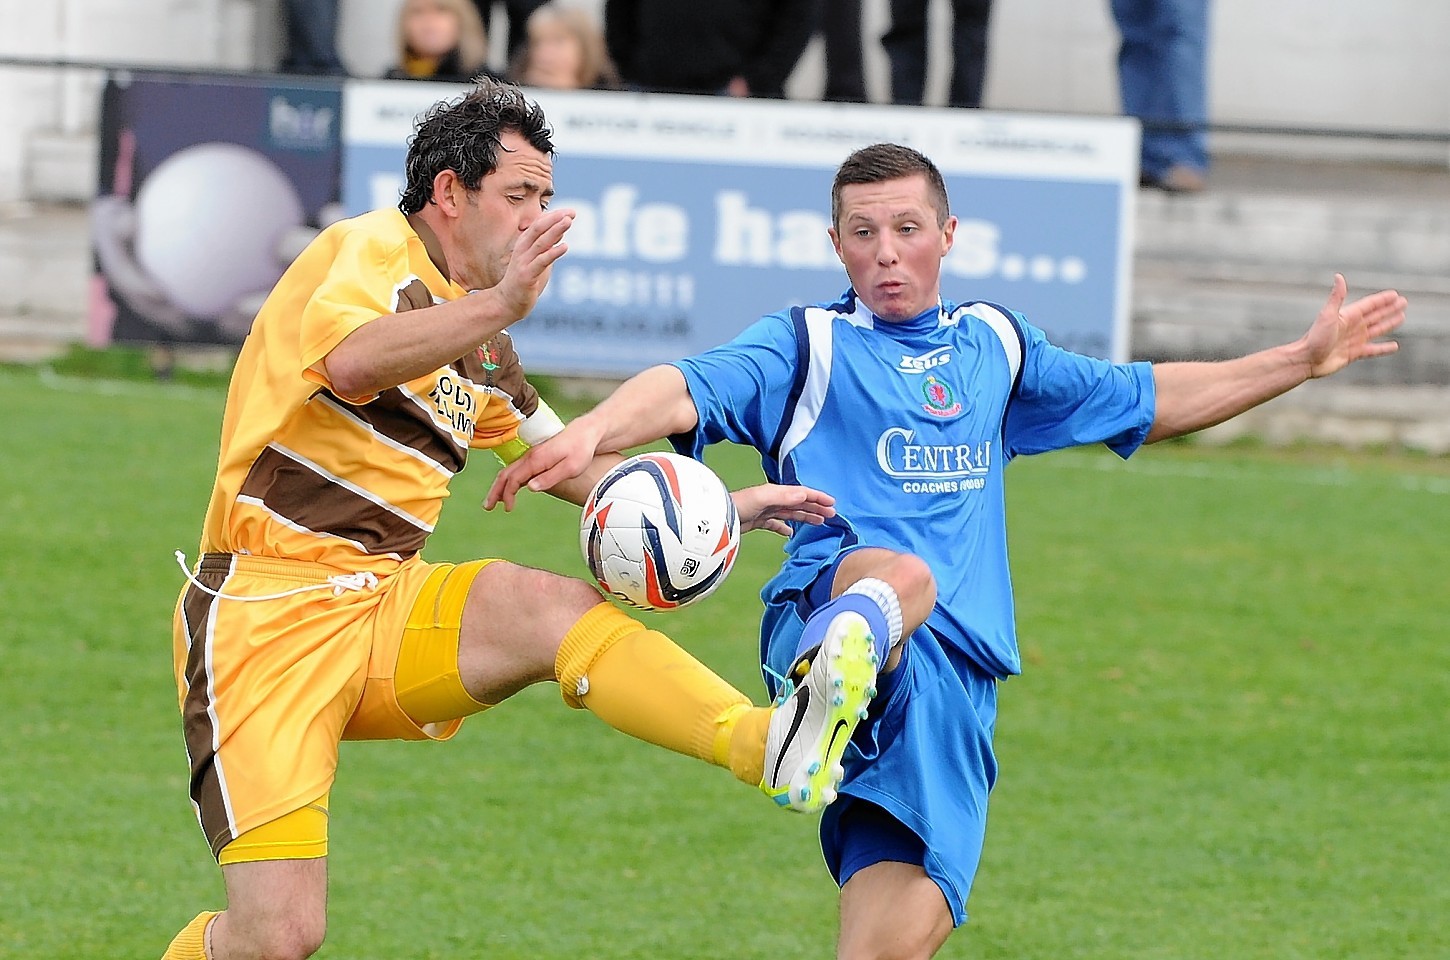 Graeme Grant will miss out for Forres again